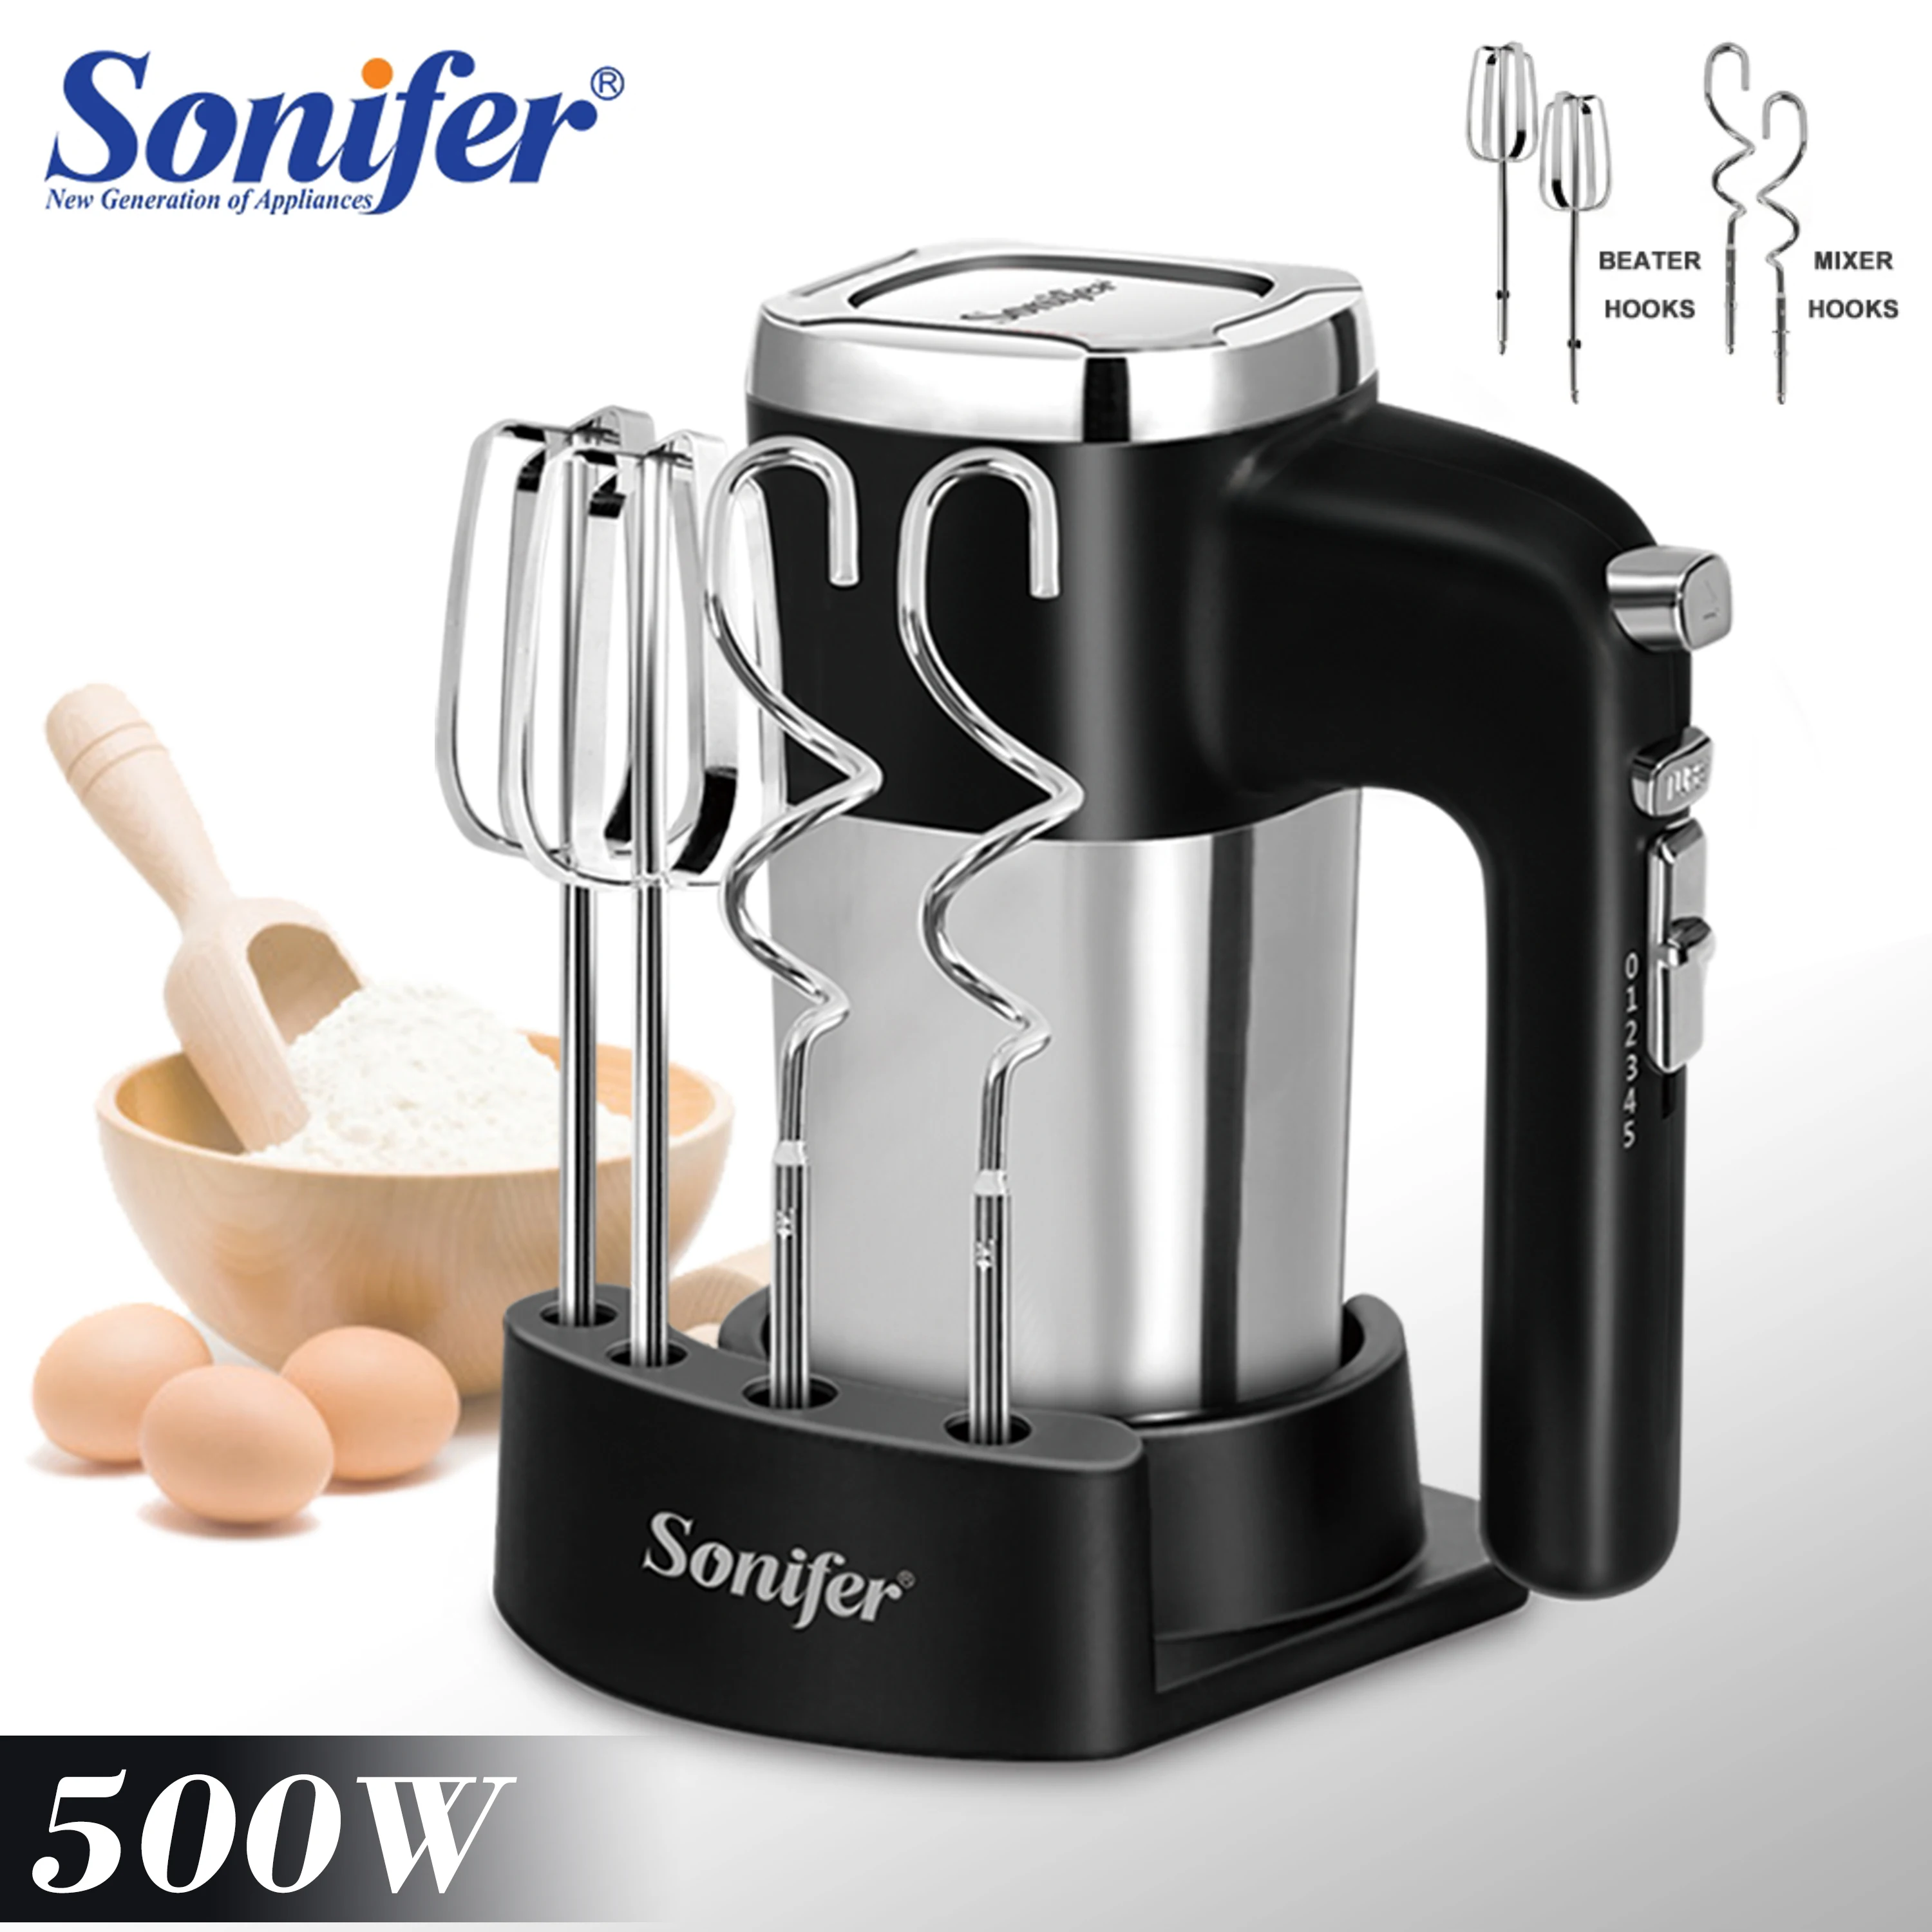 500W Food Mixers With Dough Hooks Chrome Beaters Storage Case Kitchen Hand Mixer For Mixing Cakes Bread Dough Egg Whites Sonifer